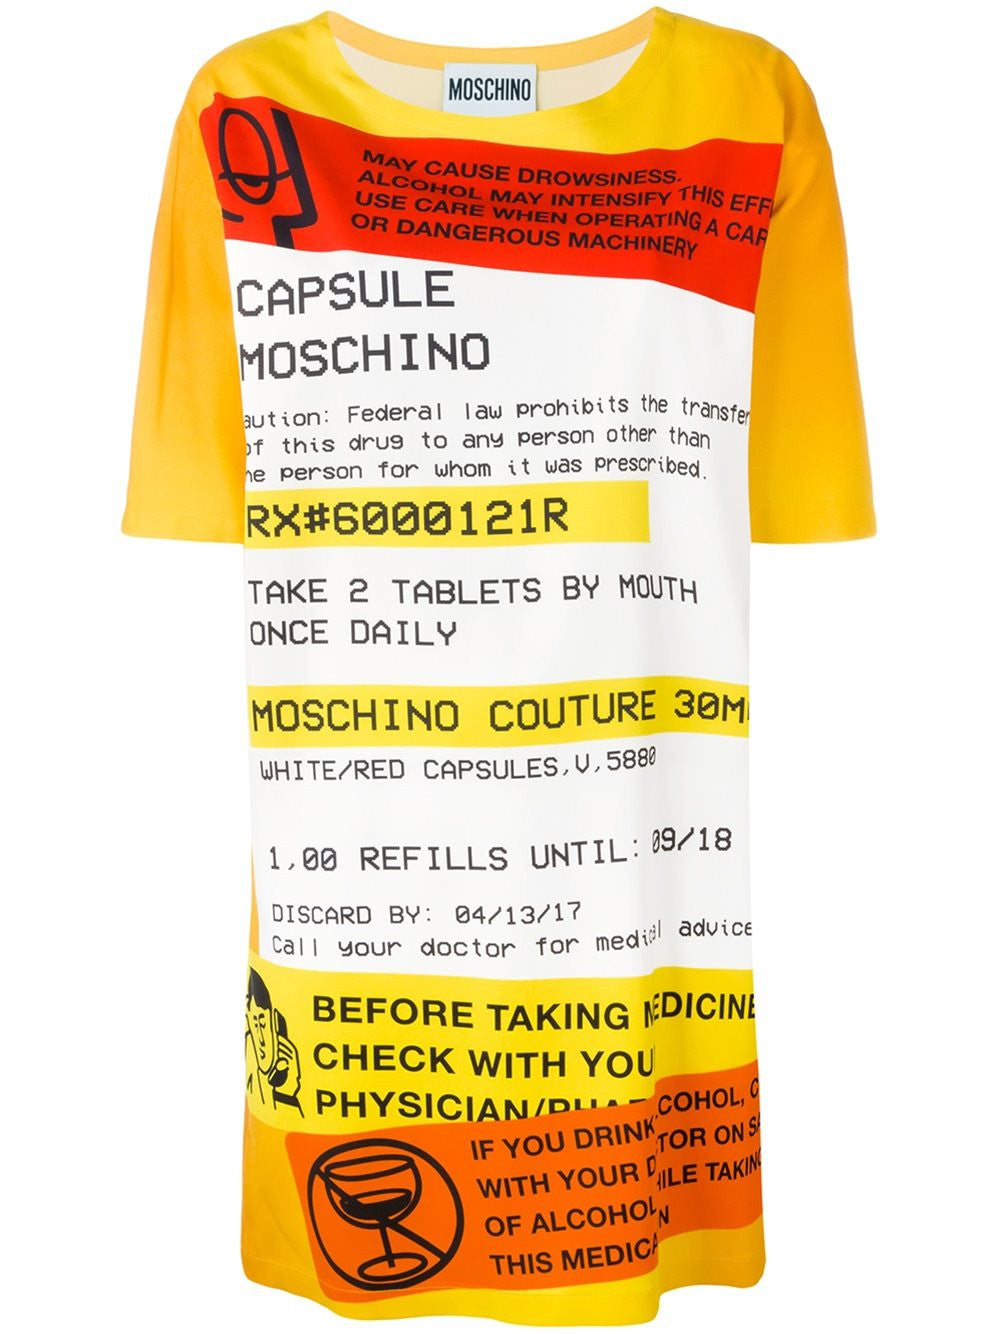 MOSCHINO Clothing — choose from 13 items